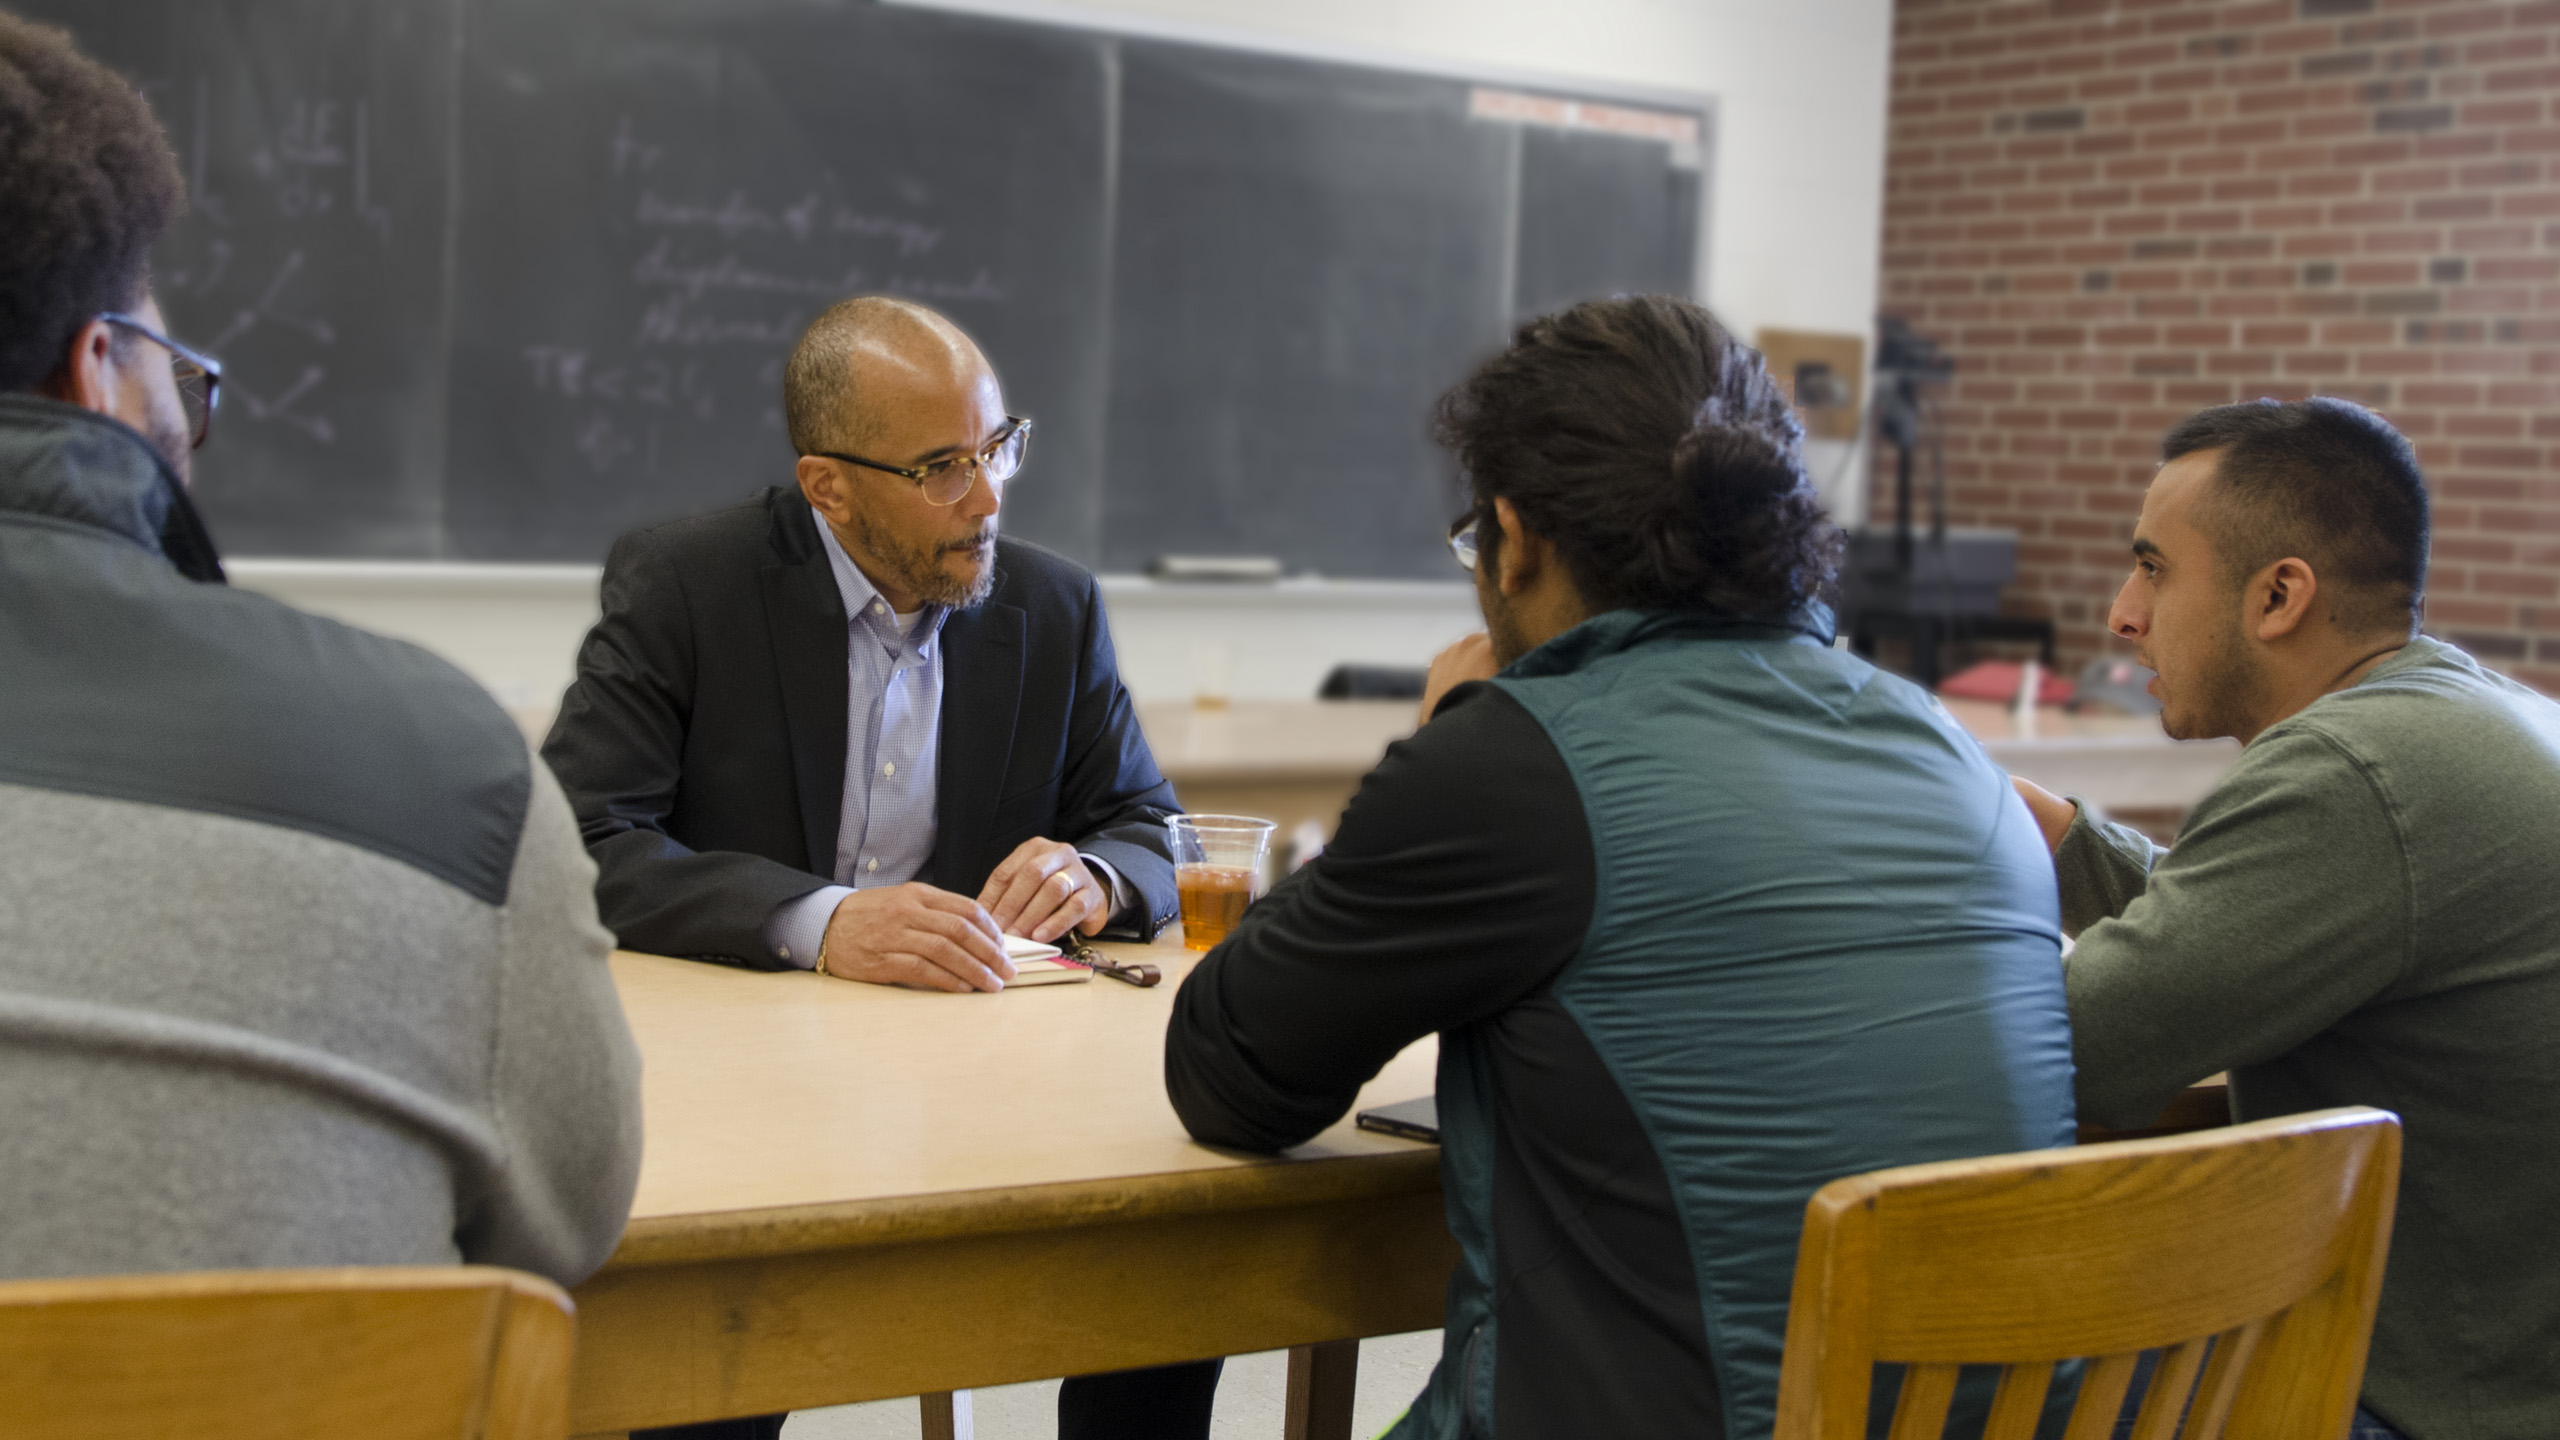 An alum volunteer talking with students at a classroom table